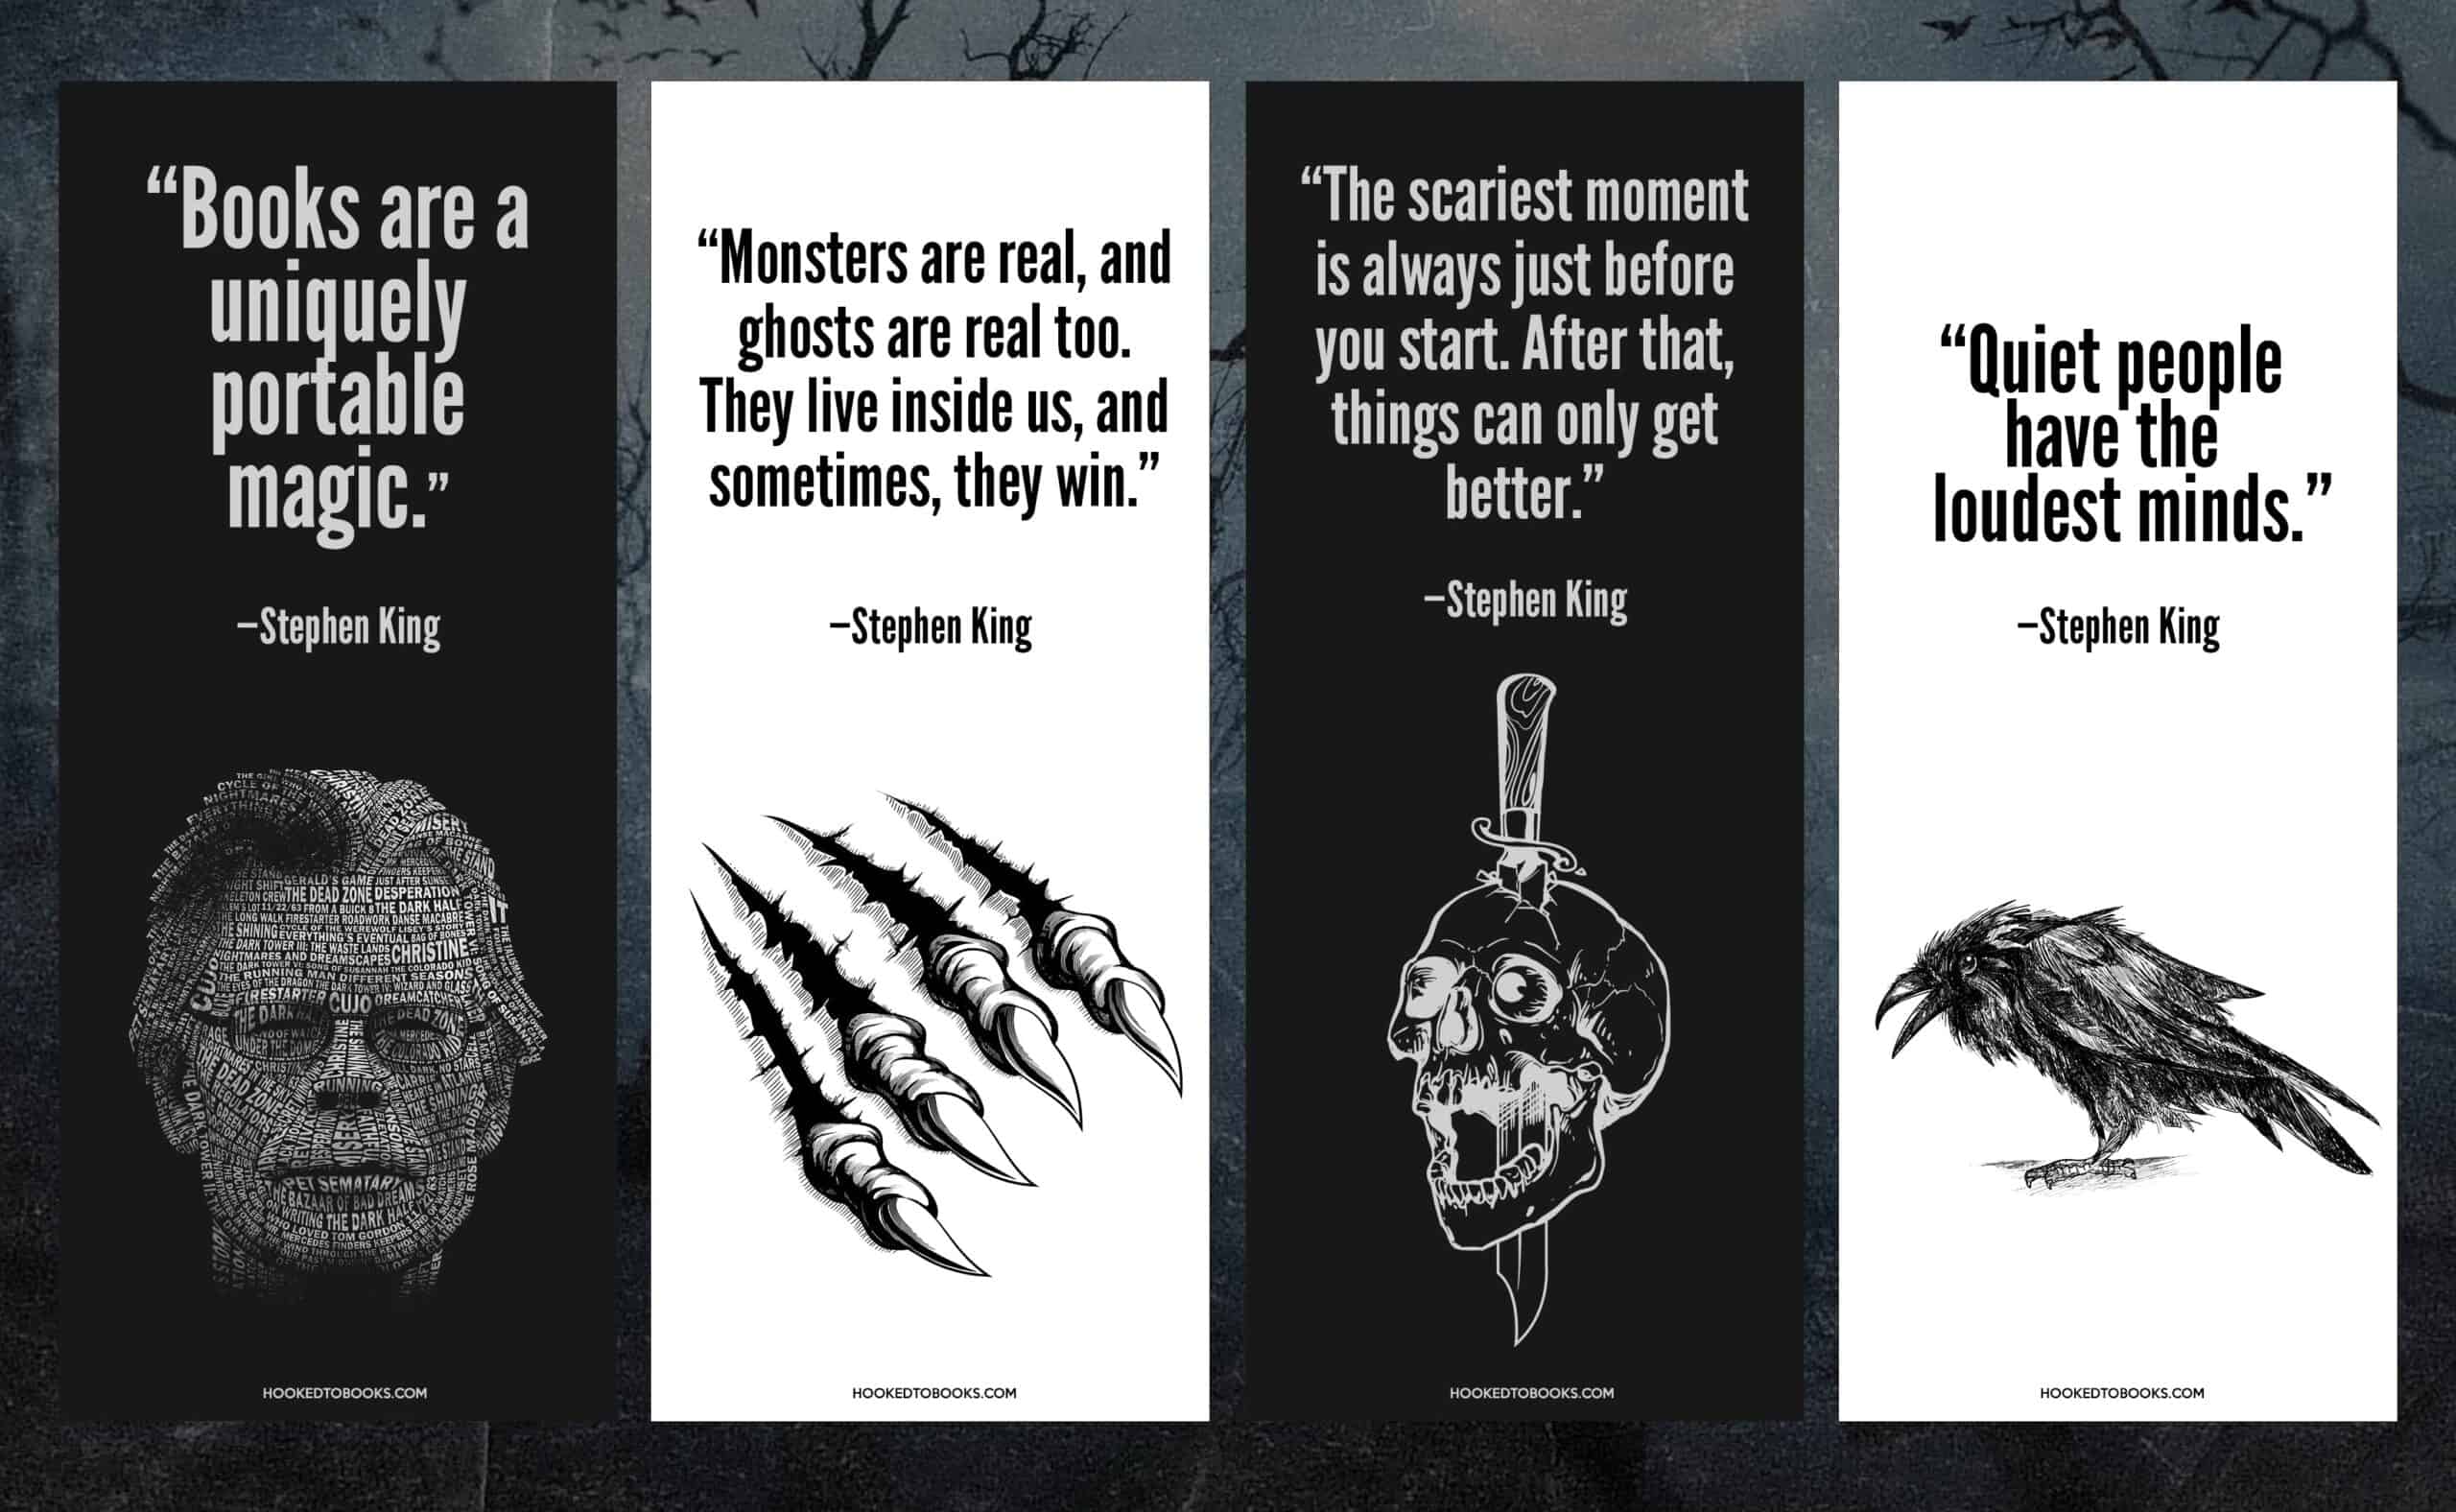 The Stephen King Quote Compendium: A Must-Have For Fans